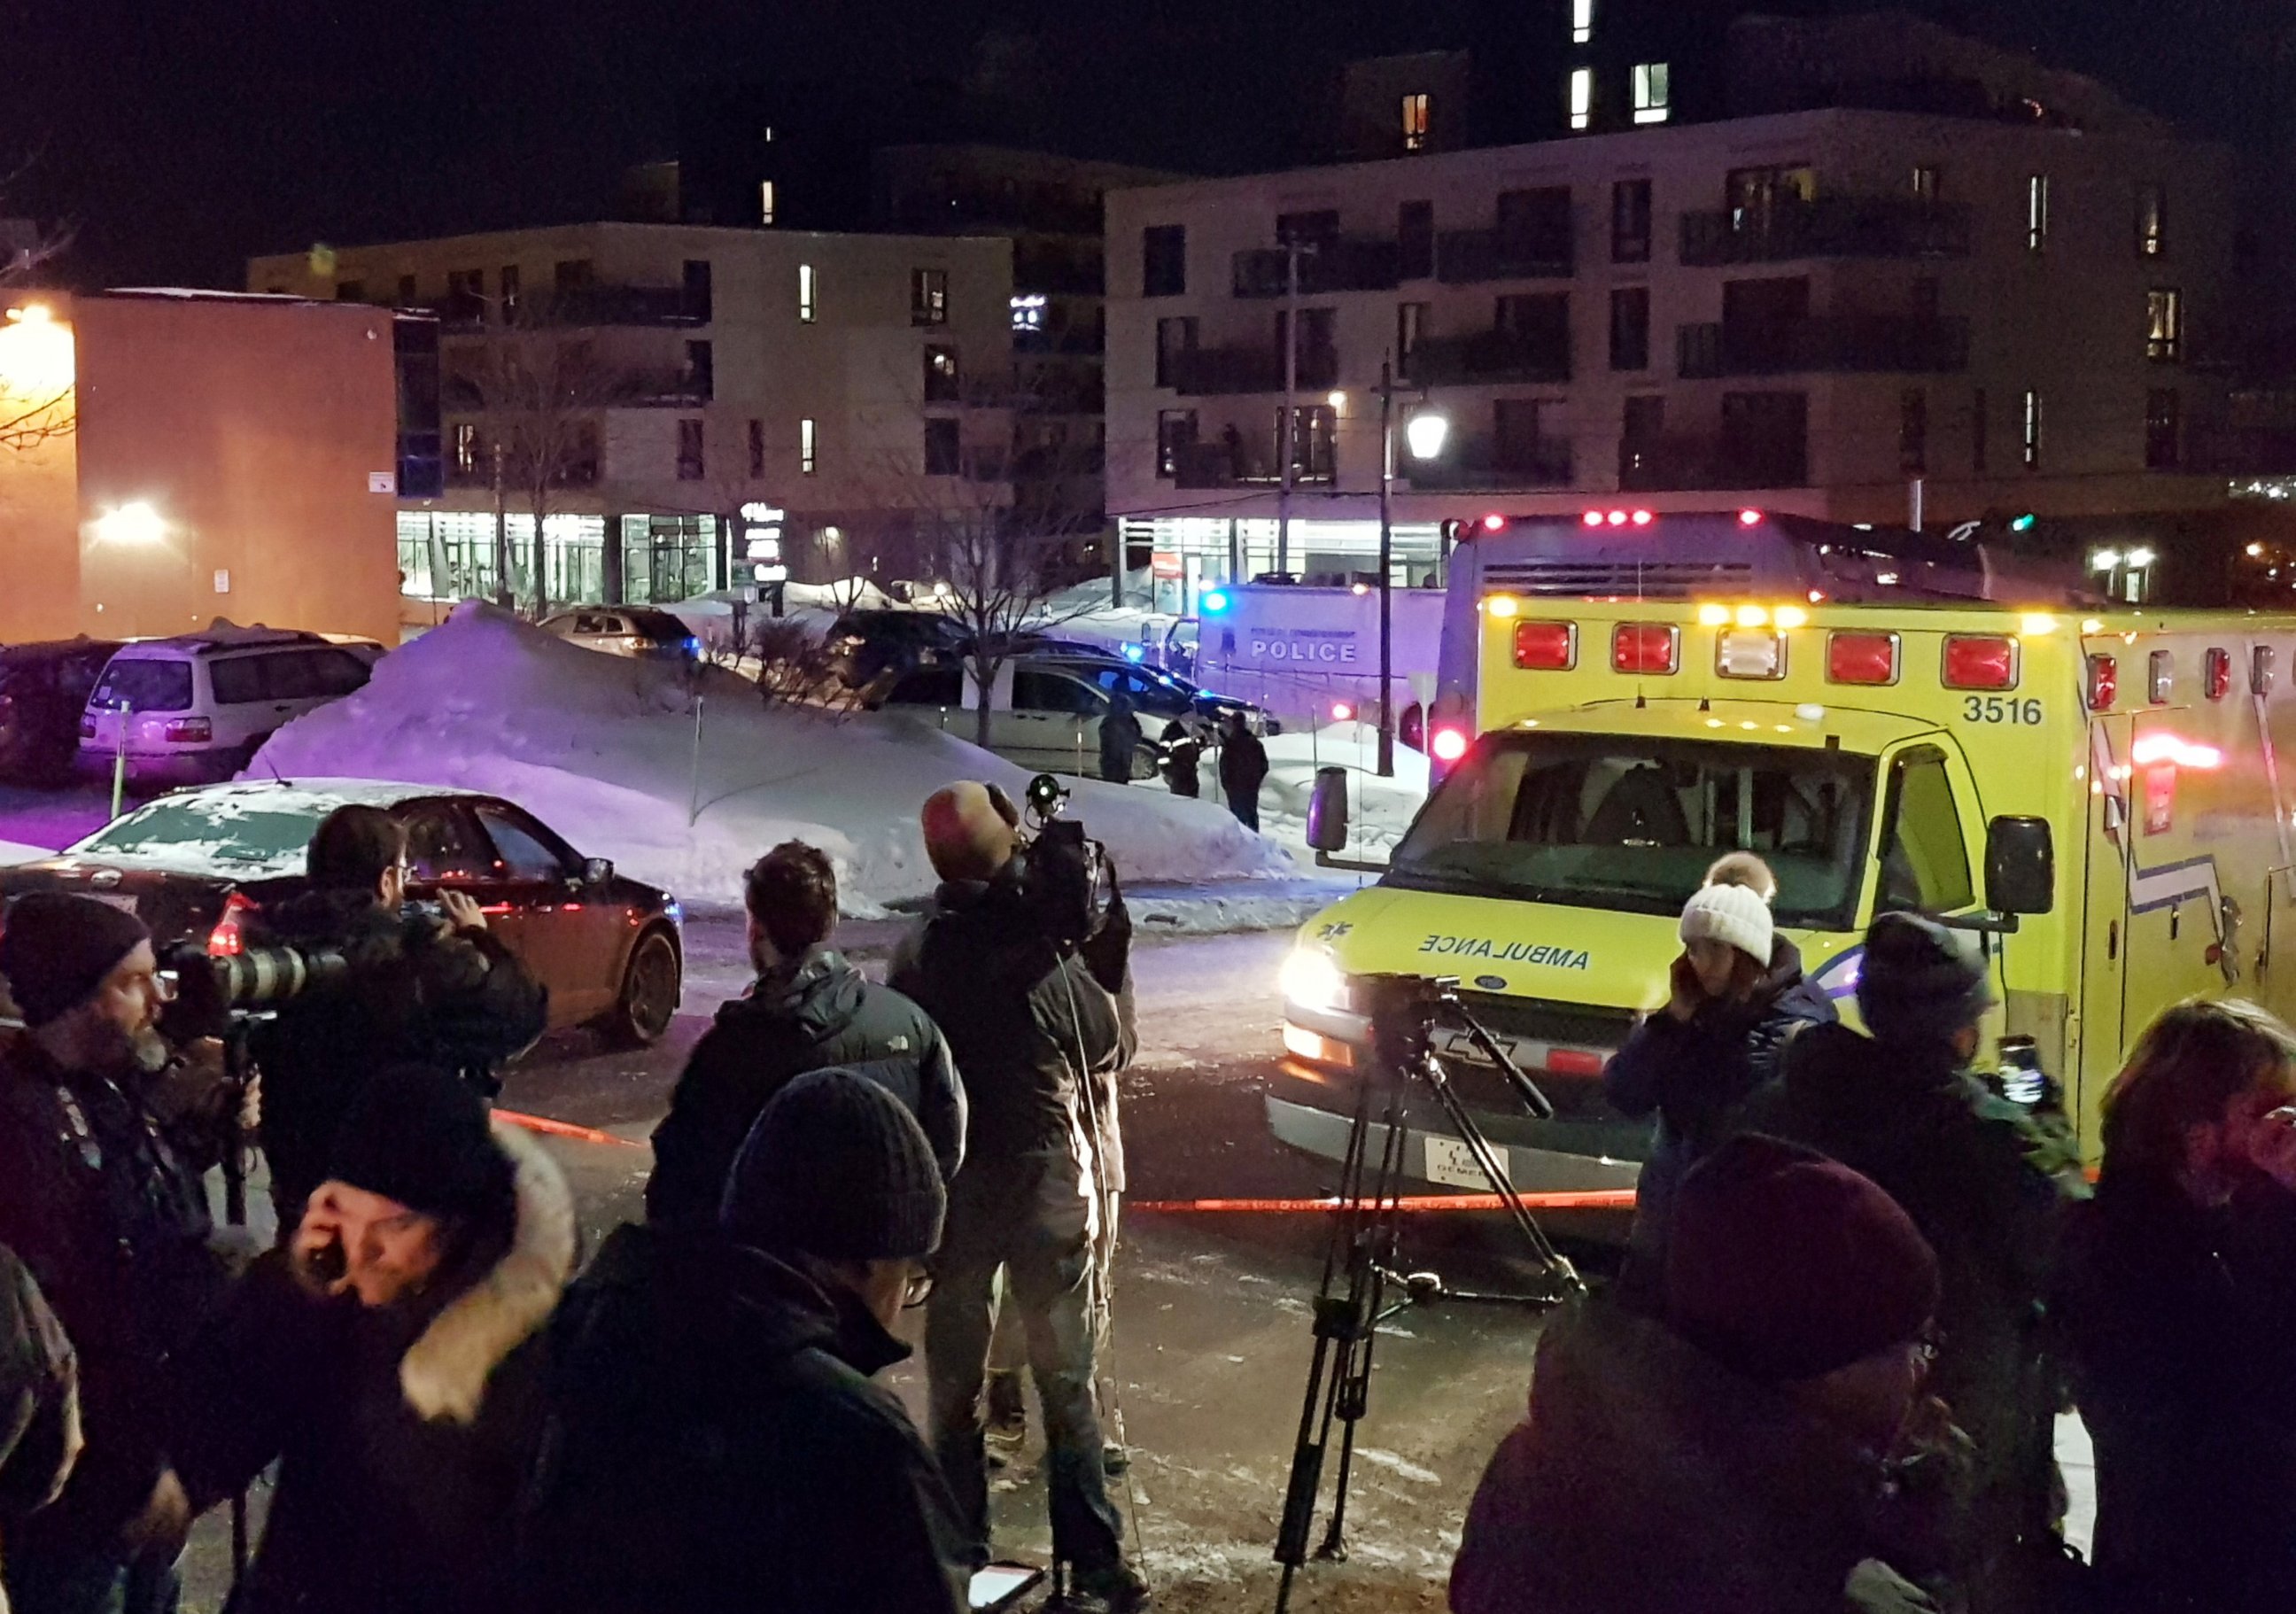 PHOTO: An ambulance is parked at the scene of a fatal shooting at the Quebec Islamic Cultural Centre in Quebec City, Canada, Jan. 29, 2017.